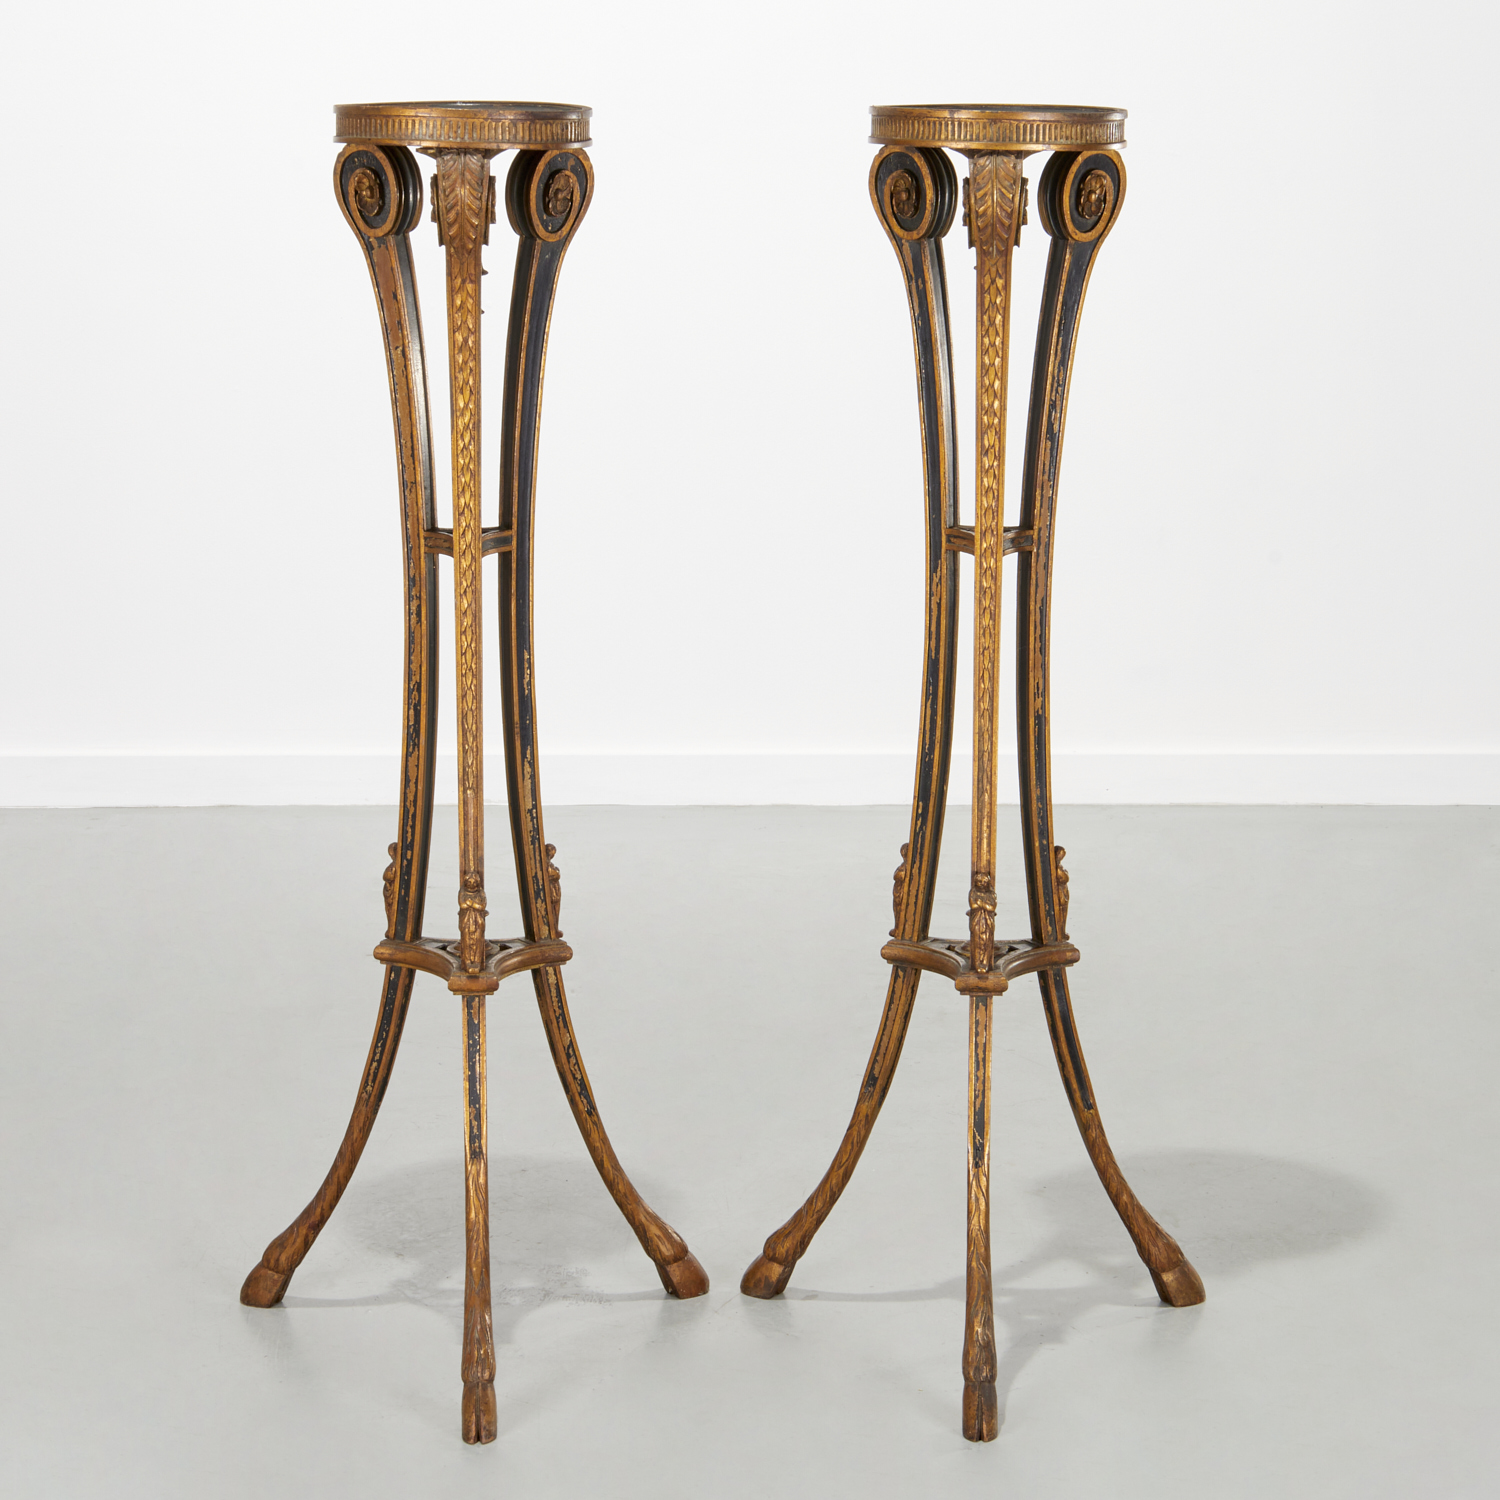 PAIR CONTINENTAL NEOCLASSICAL TORCHIERE